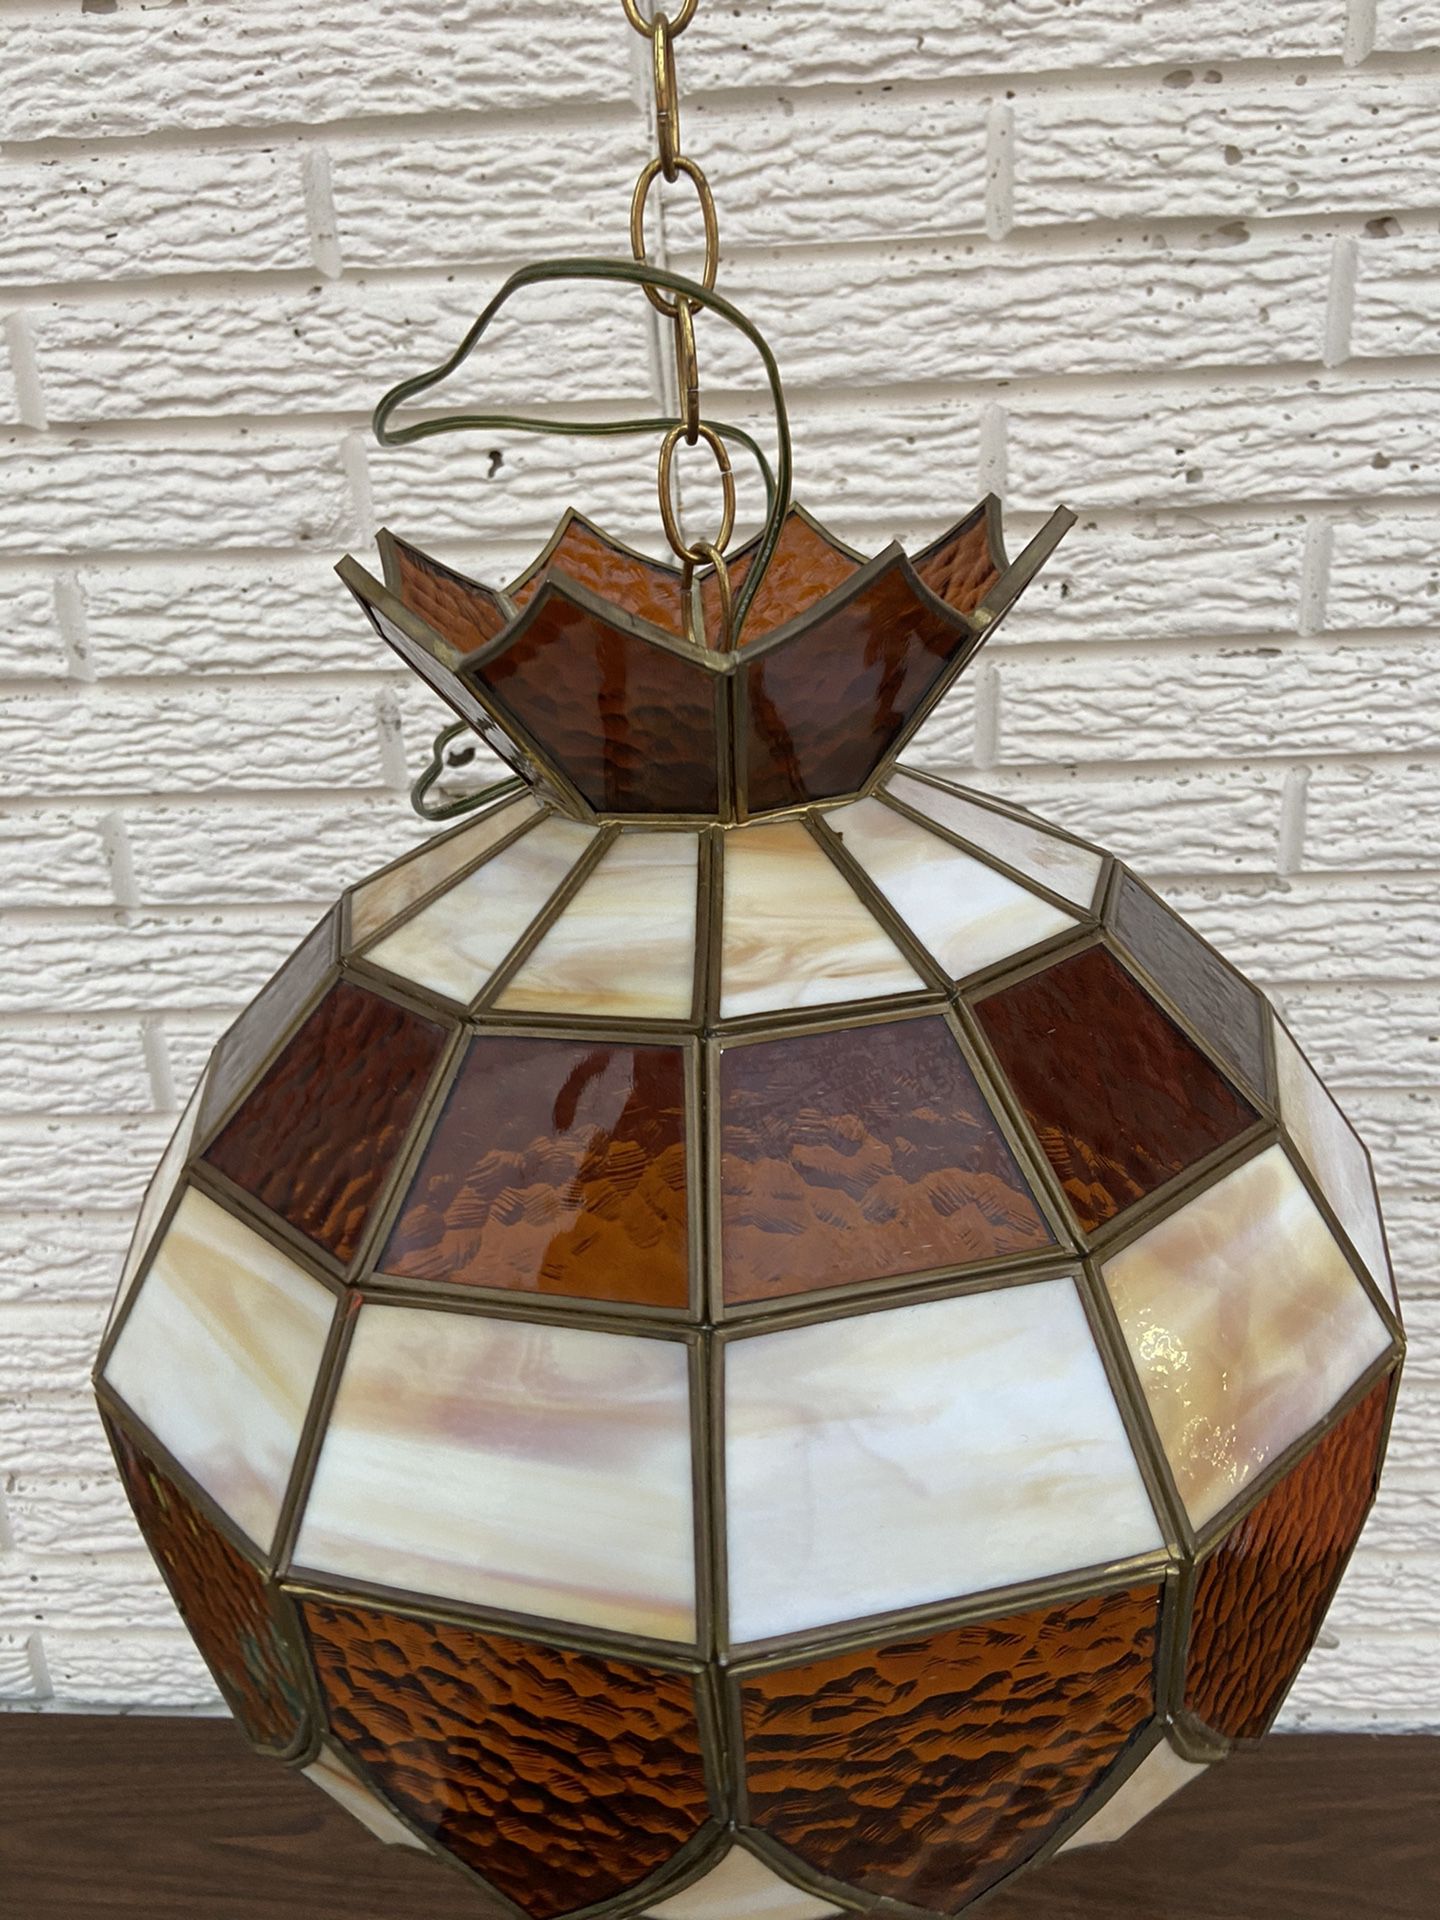 15” Vintage STAINED SLAG GLASS HANGING Lamp Tiffany Style Light Chandelier